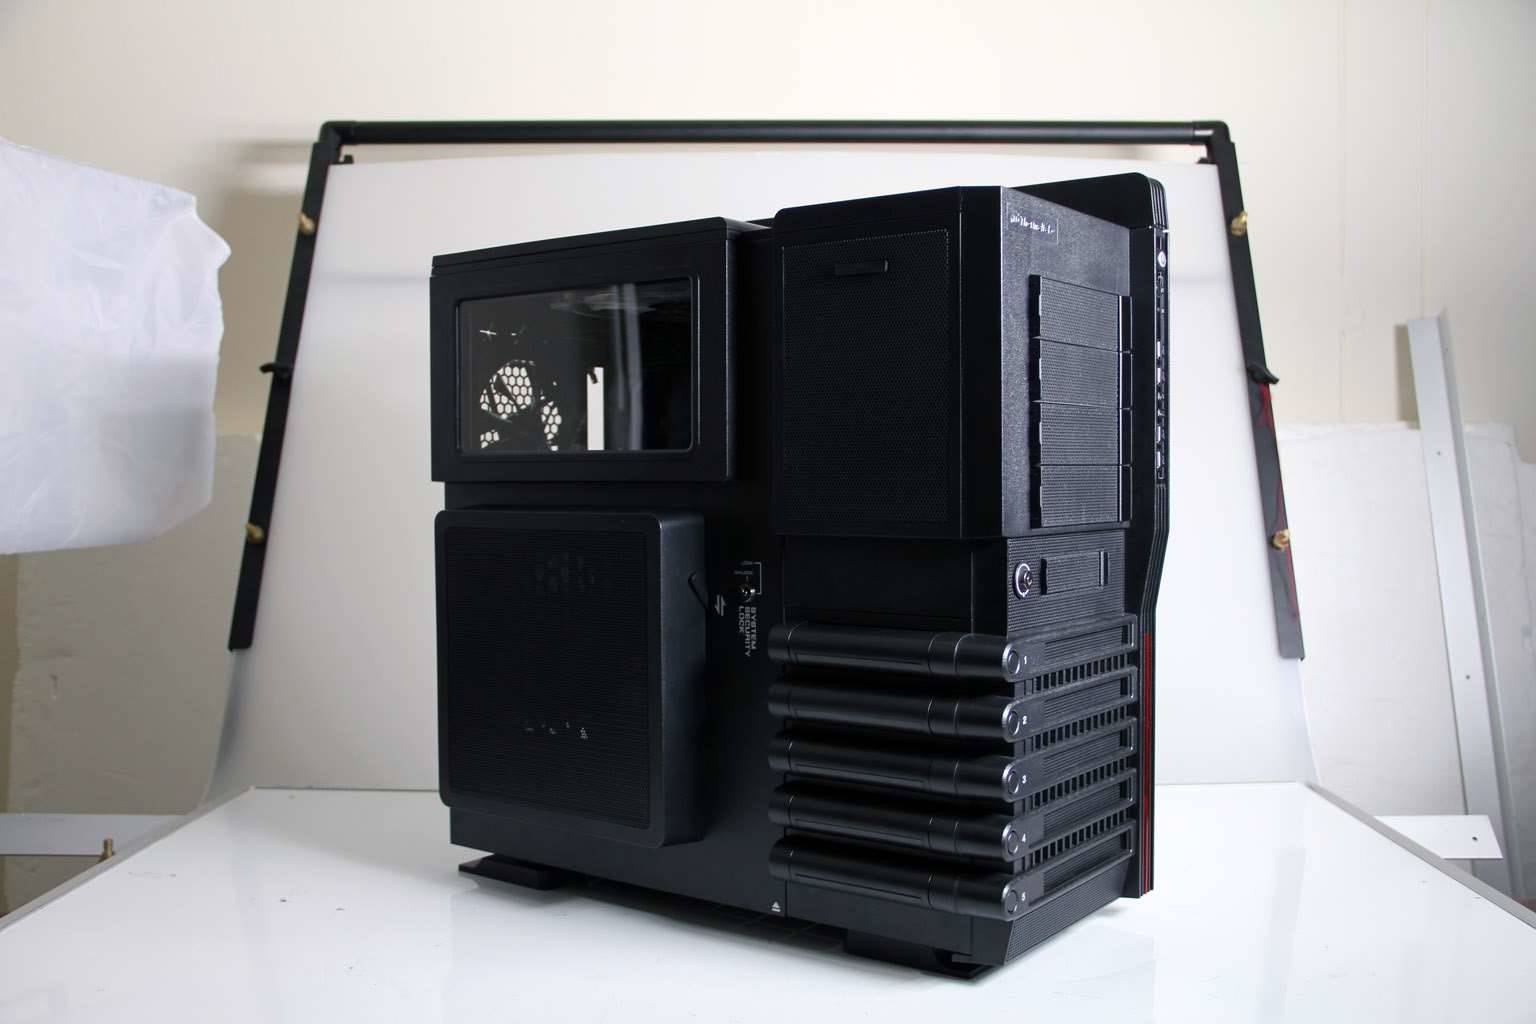 EXCLUSIVE: Thermaltake's new Level10 GT case - Cases - Atomic - PC & Tech Authority